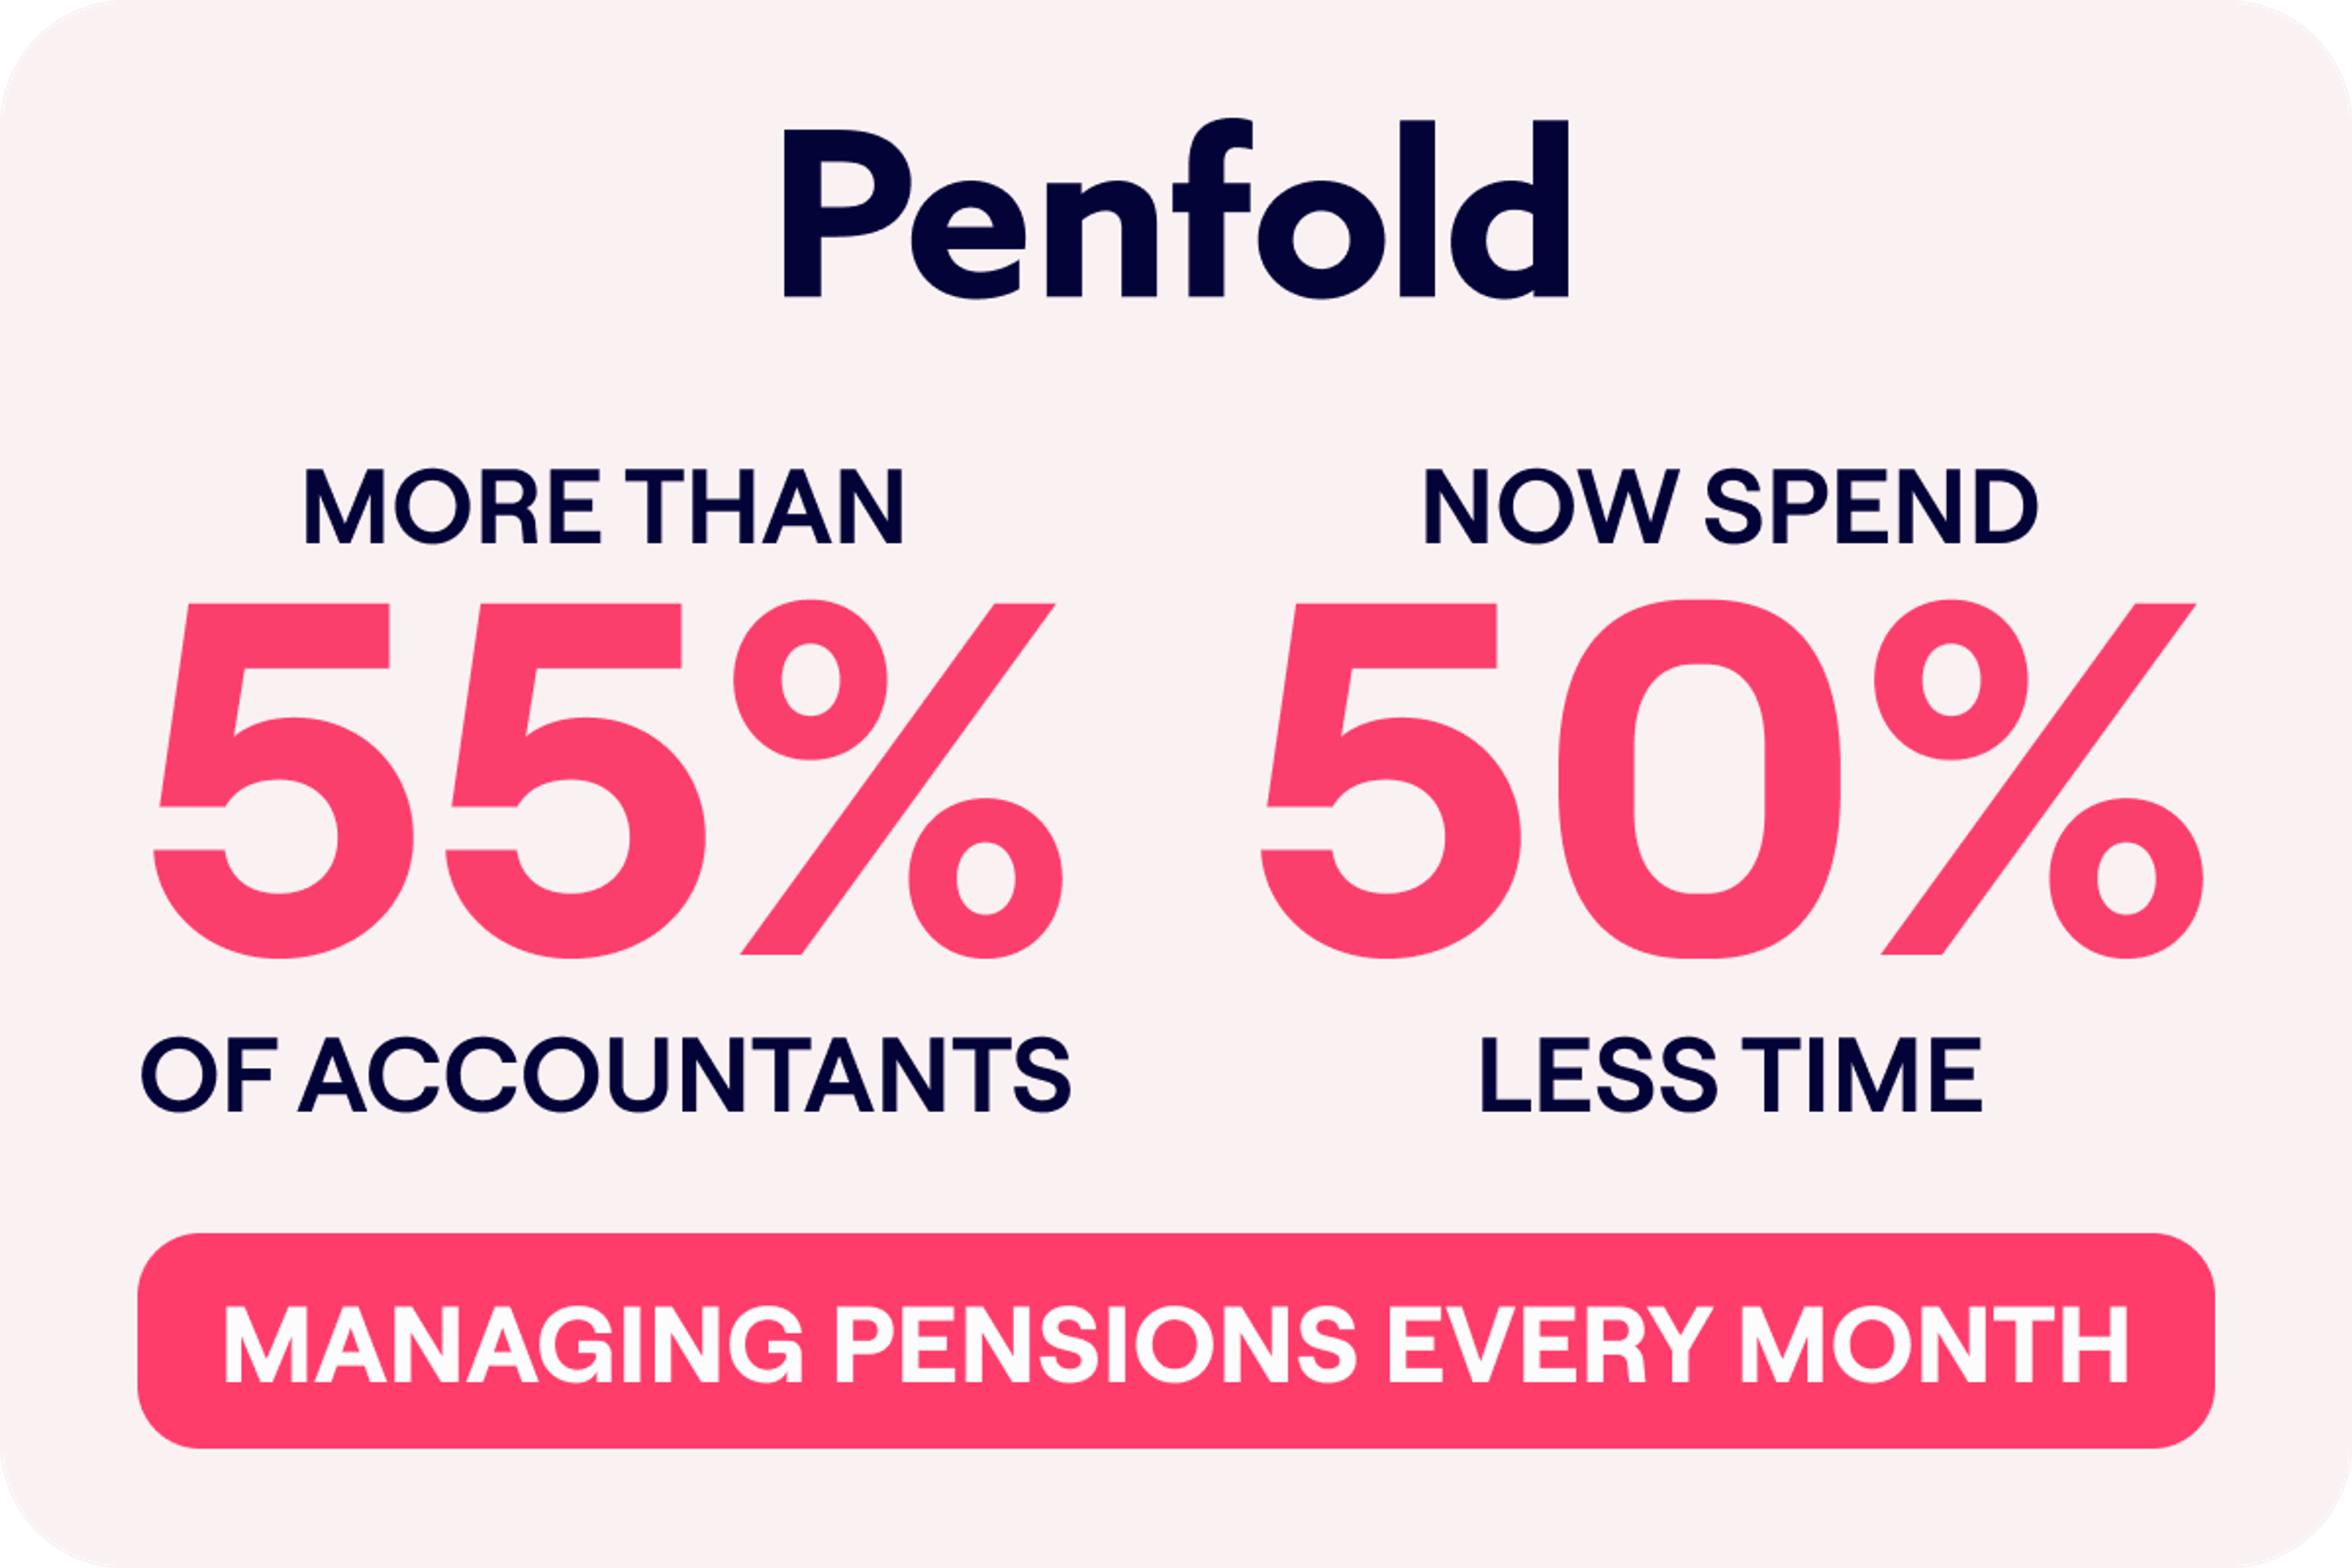 A graphic stating "MORE THAN 55% OF ACCOUNTANTS NOW SPEND 50% LESS TIME MANAGING PENSIONS EVERY MONTH." The percentages are emphasized in large, pink numbers against a contrasting background, highlighting the efficiency gains for accountants using Penfold's services.